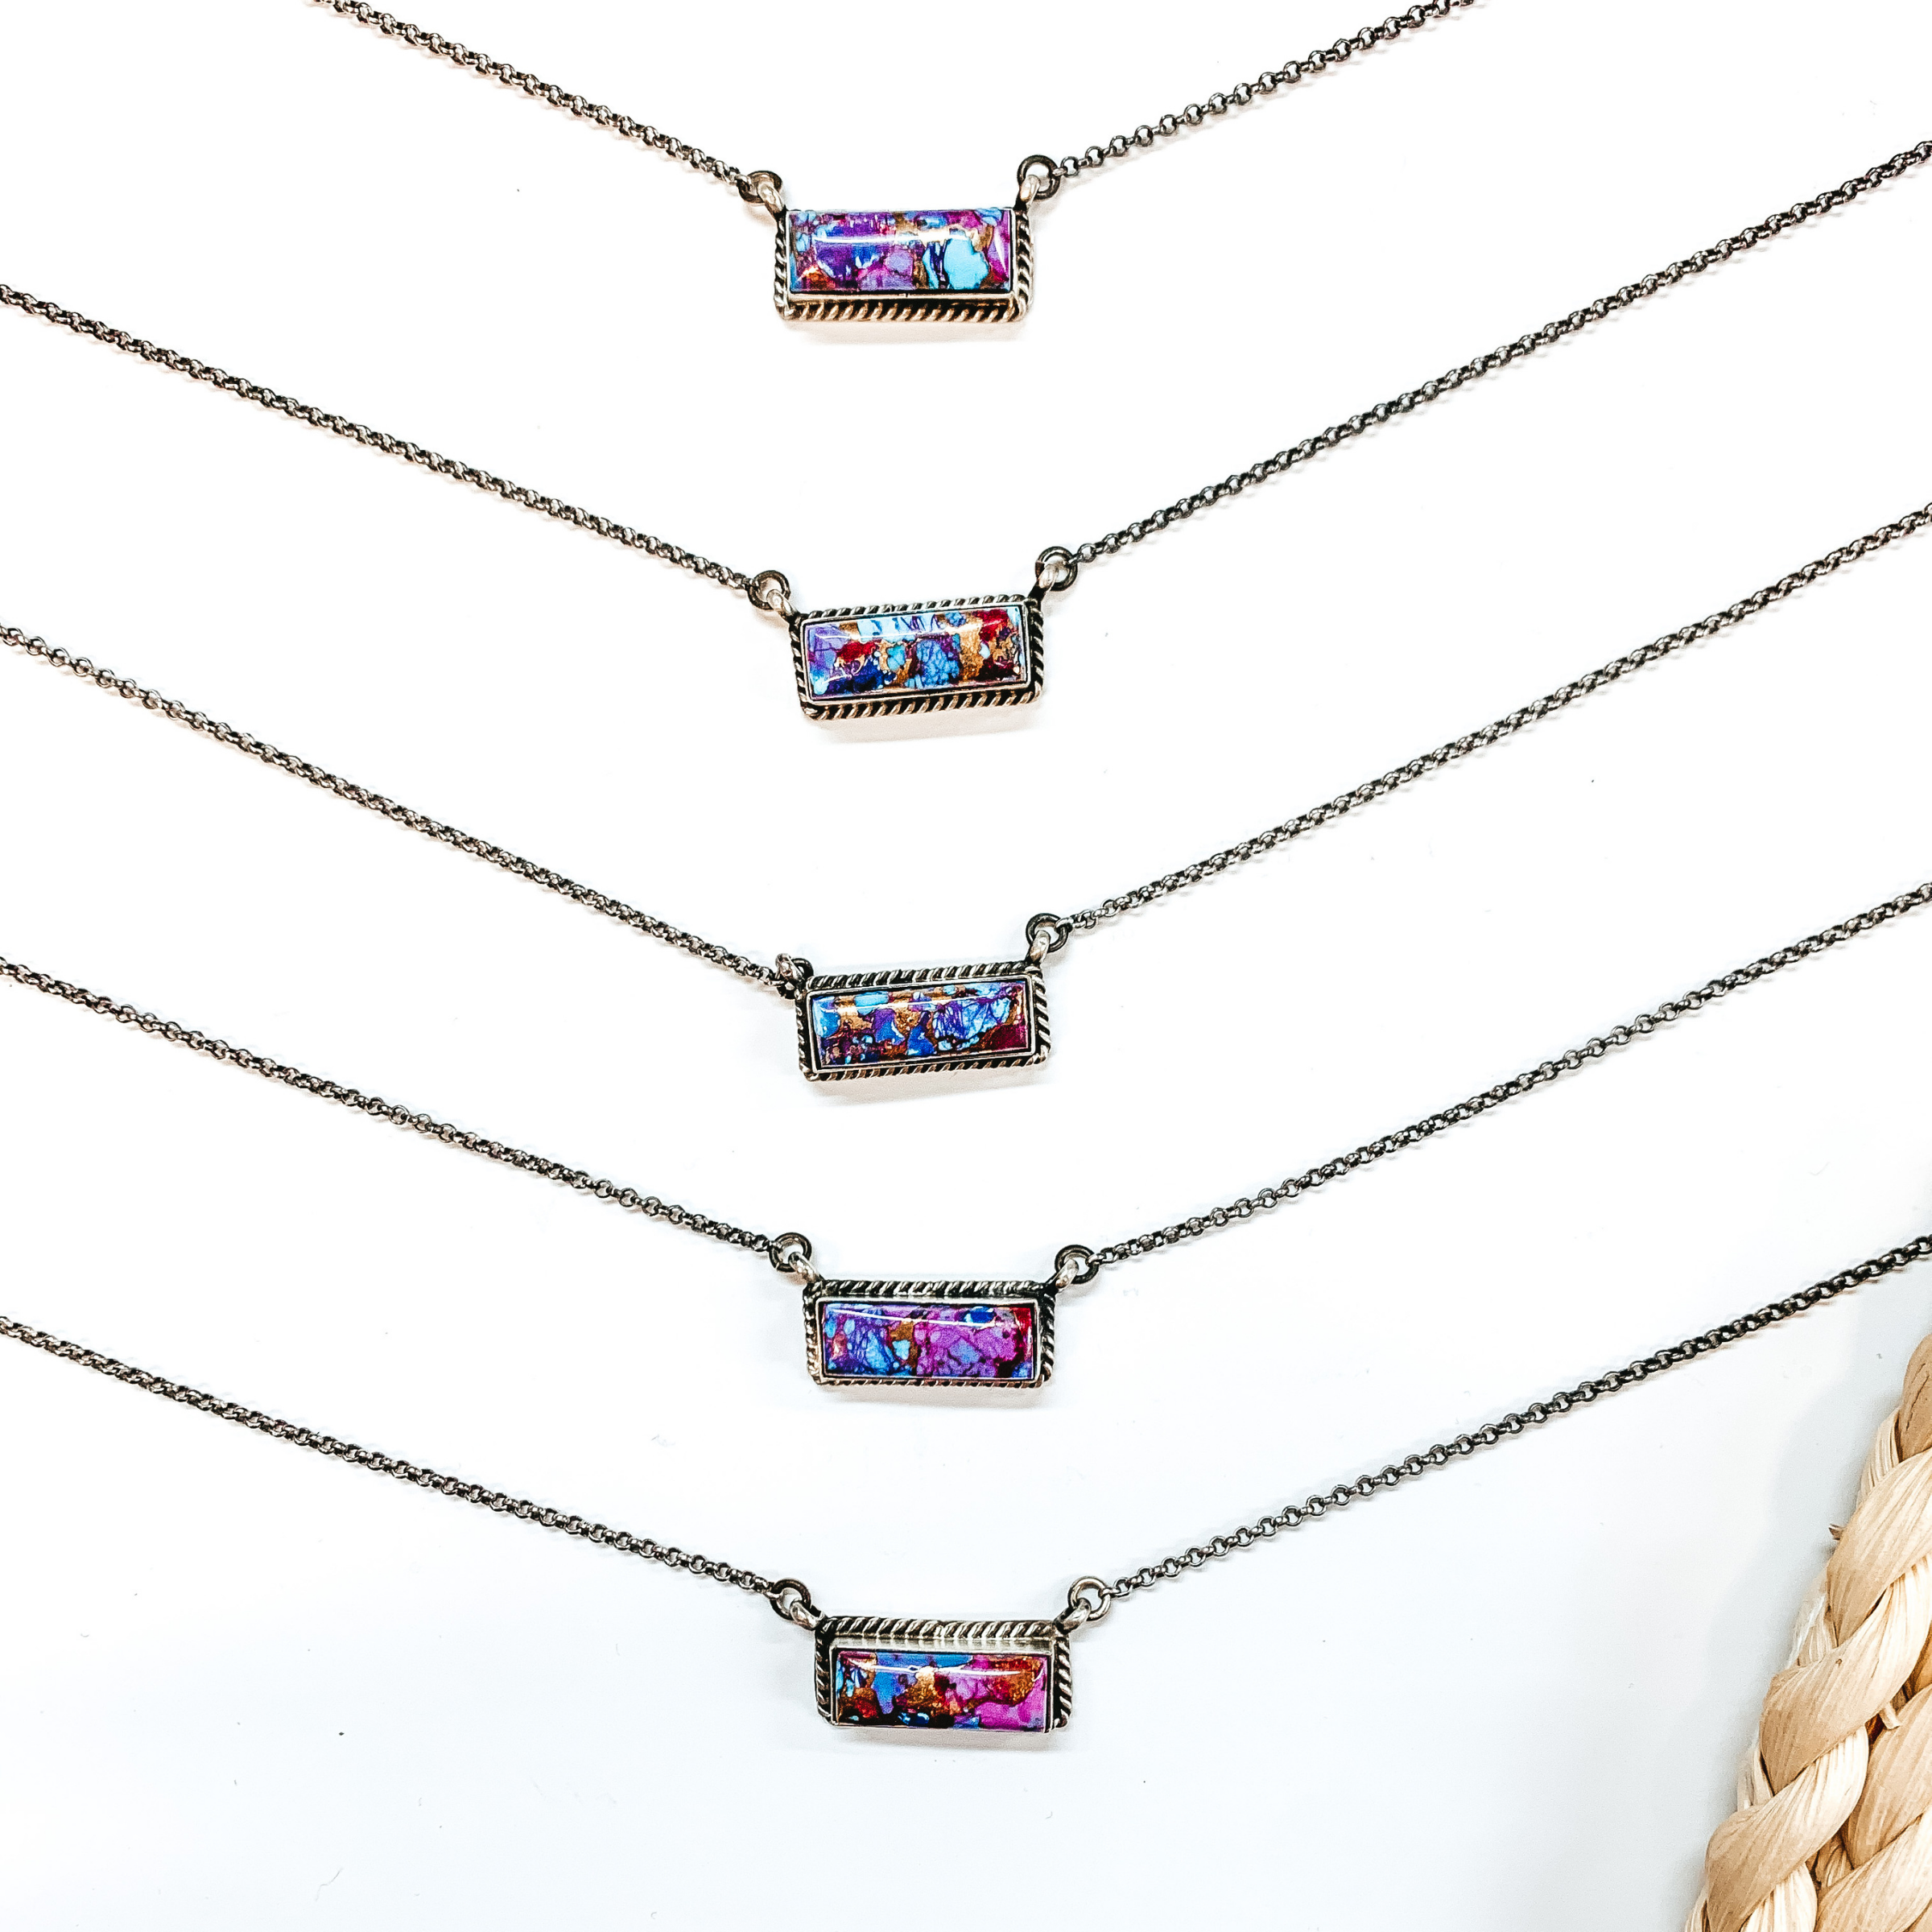 Vernon Kee | Navajo Handmade Sterling Silver Chain Necklace with Remix Mojave Turquoise Stone and Rope Detailing Bar - Giddy Up Glamour Boutique